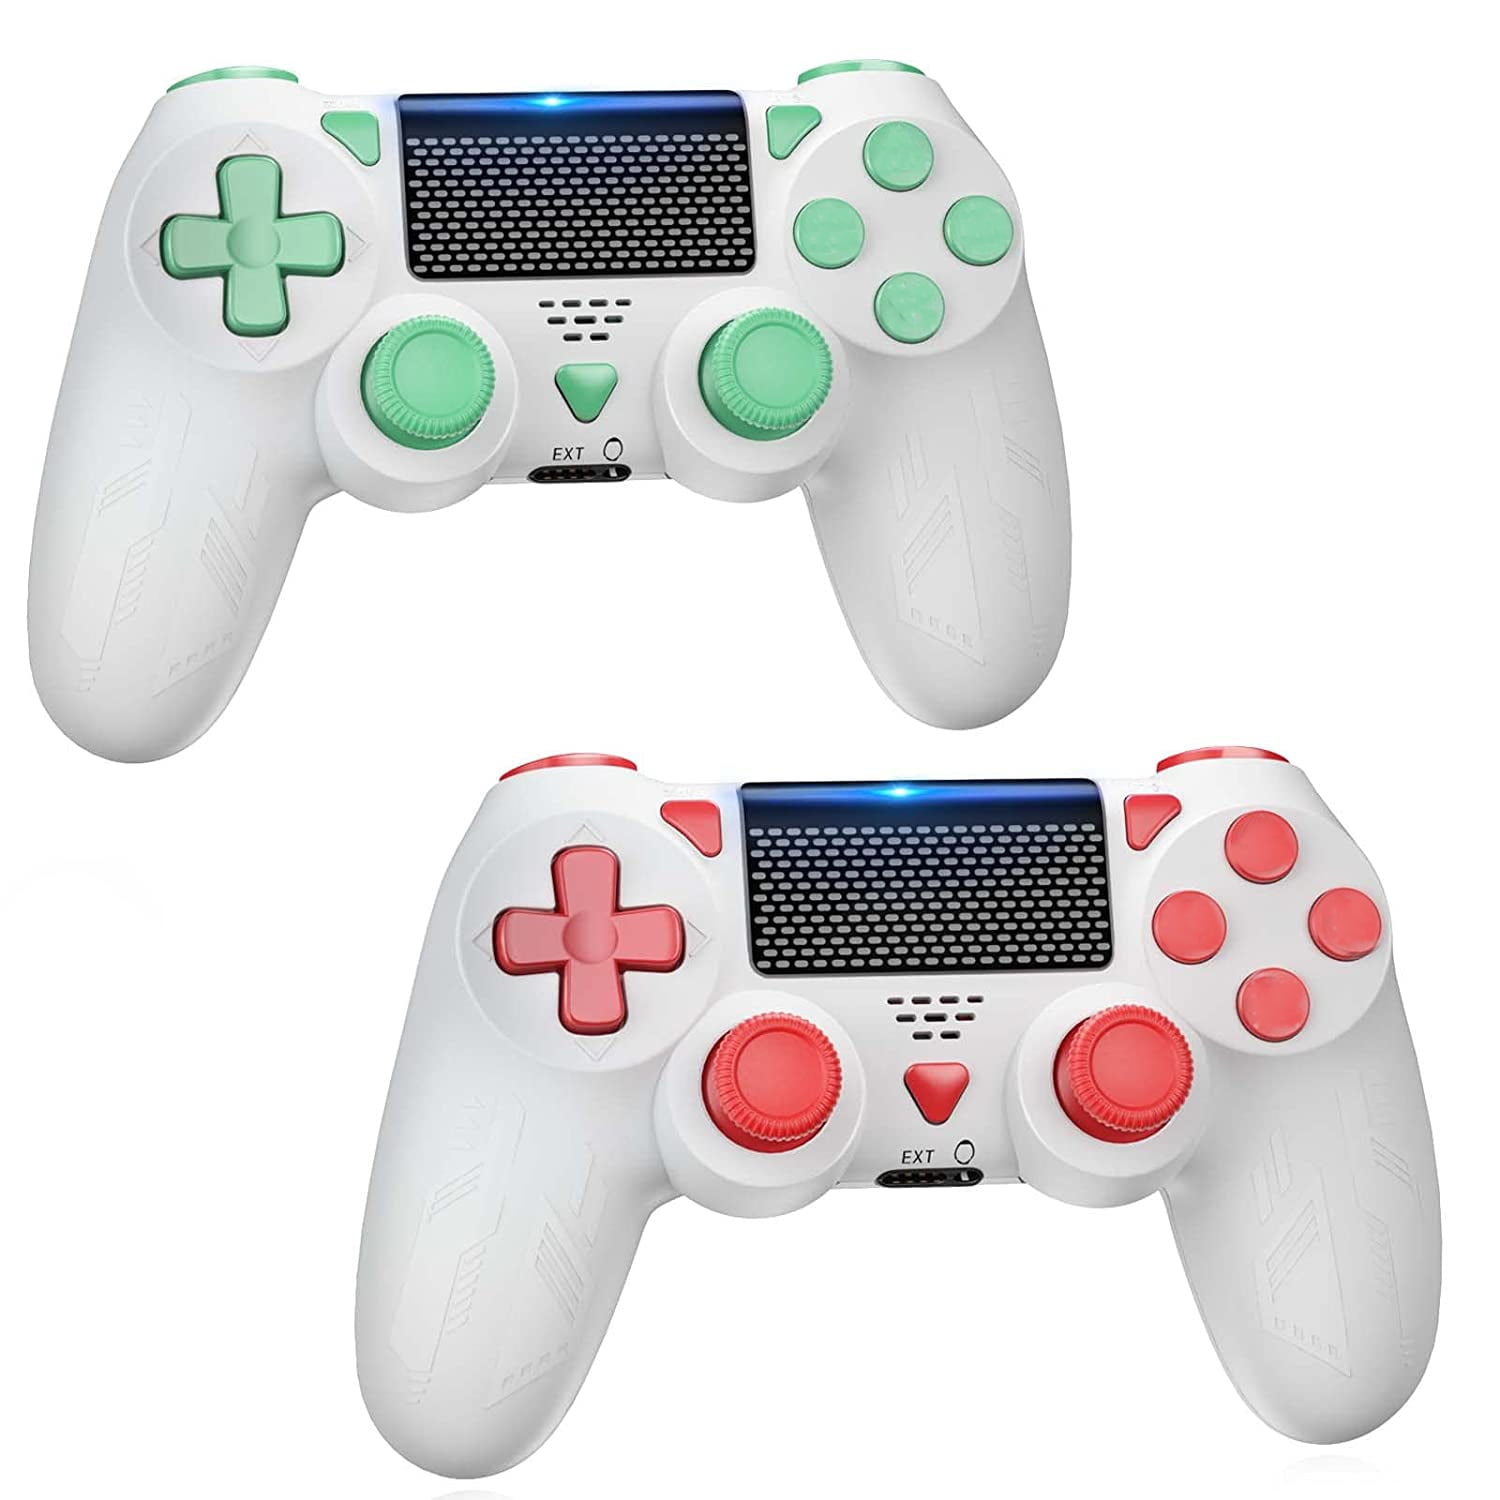 Buy 2 Pack Wireless Controller for PS4, Bonadget Wireless Gamepad Compatible with Playstation 4/ Pro/Slim,PS-4 Built-in 1000mAh Battery with Turbo/ Dual Vibration/6-Axis Motion Sensor Online at Lowest Price in Ubuy Denmark.